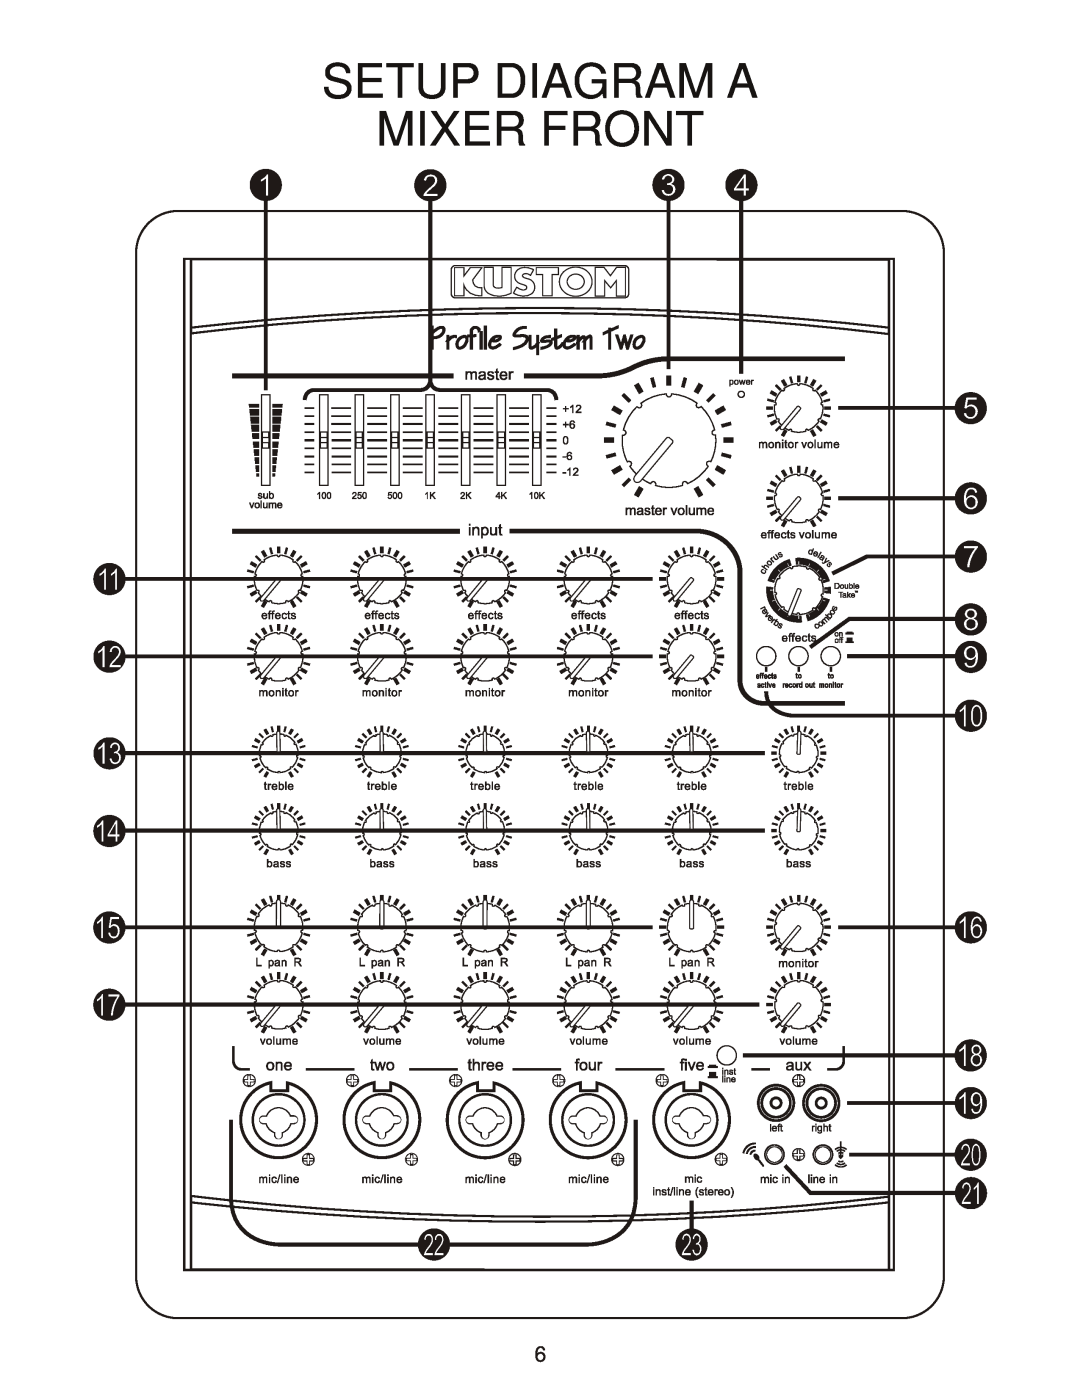 Kustom Profile System Two owner manual Setup Diagram A Mixer Front 